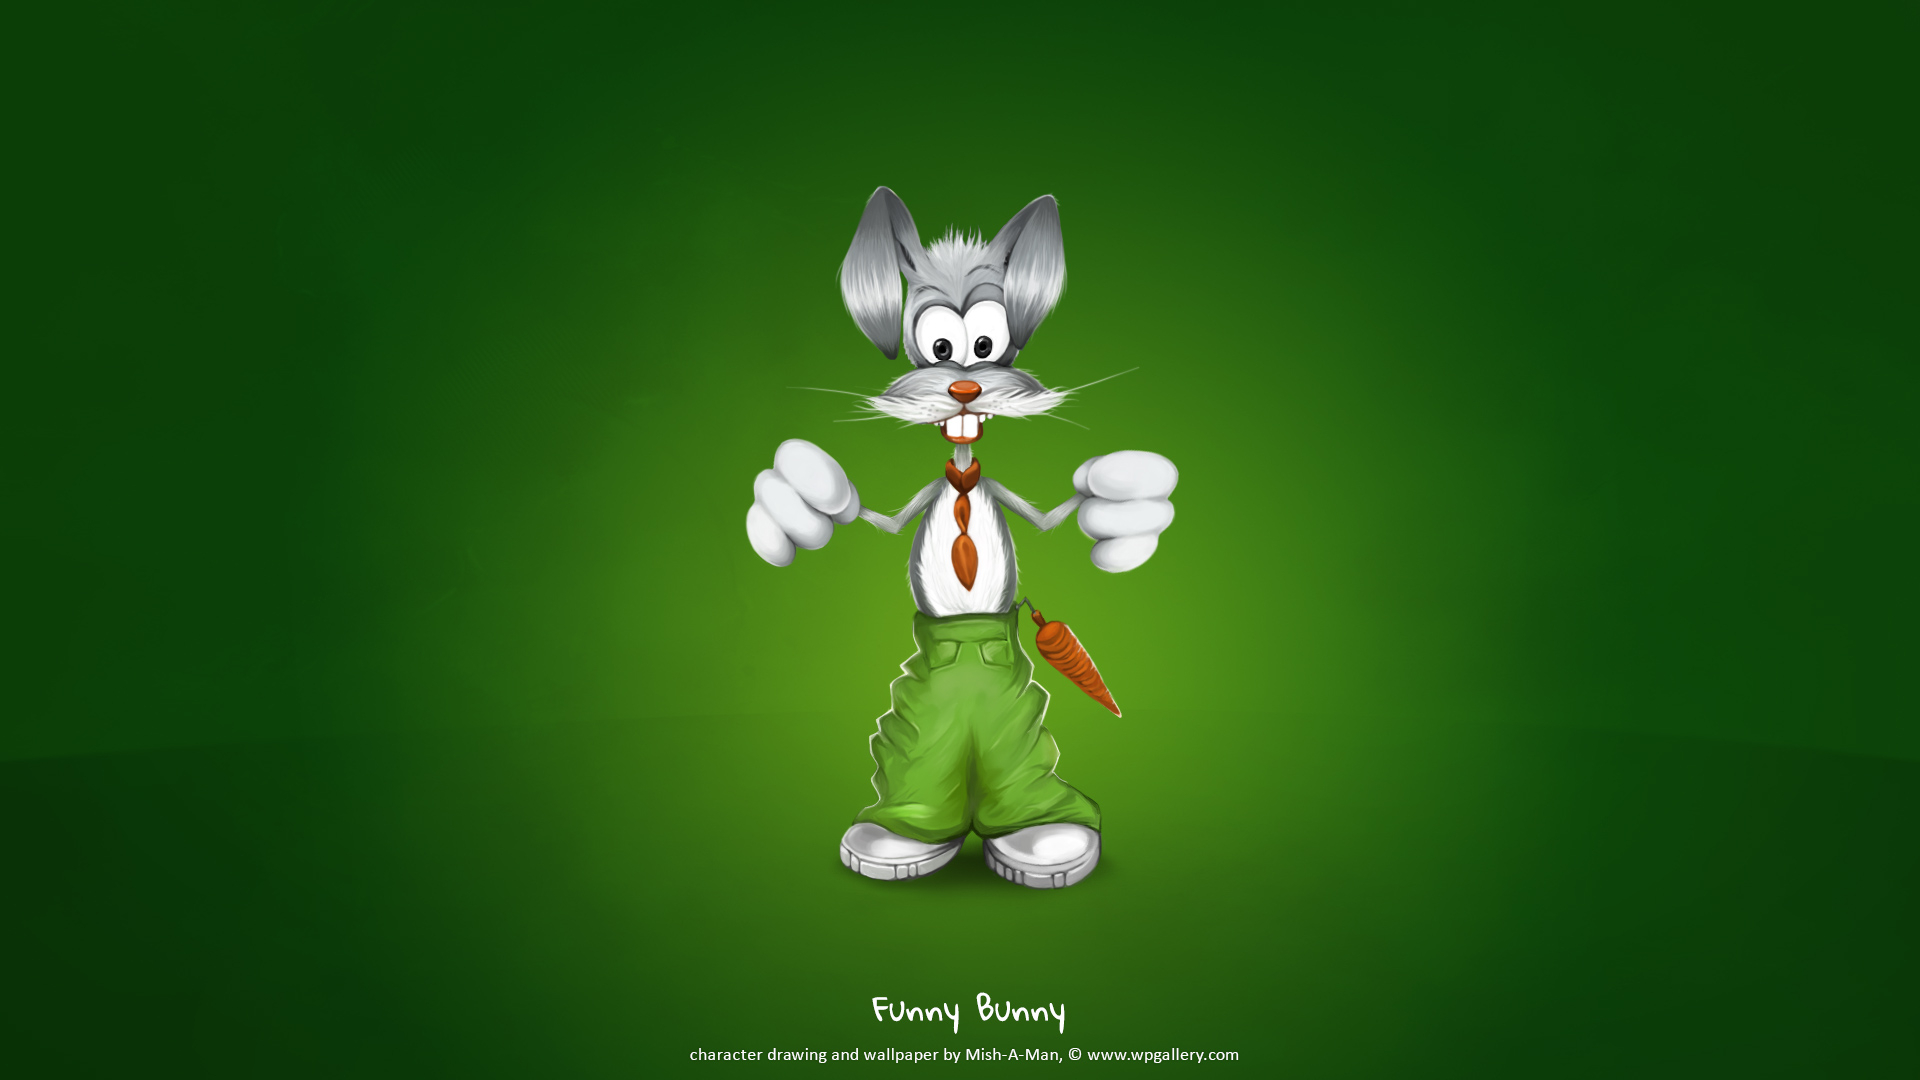 Funny Bunny for 1920 x 1080 HDTV 1080p resolution